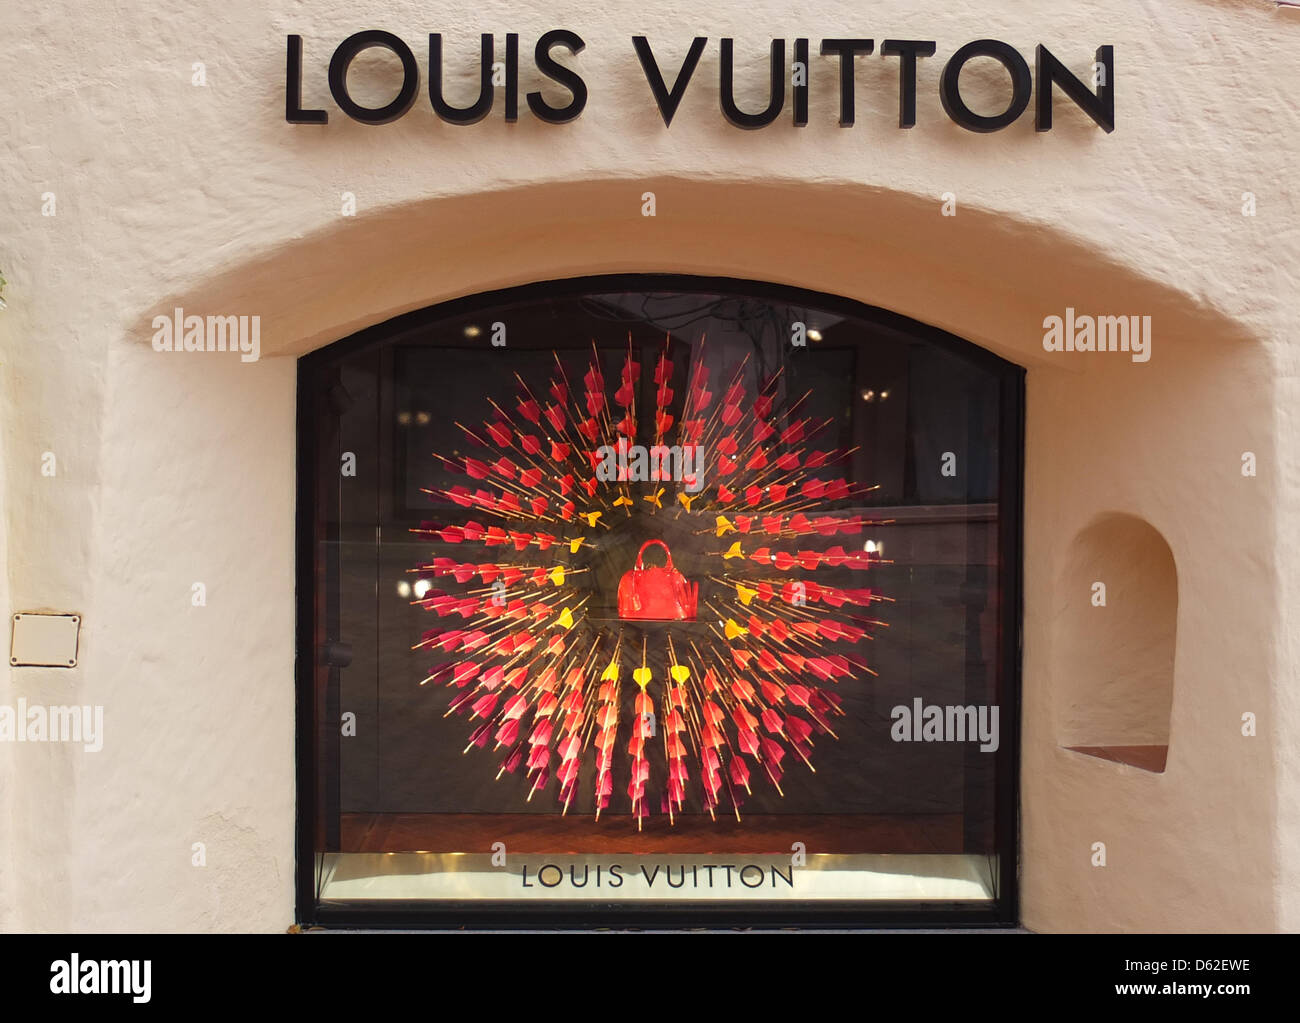 Louis Vuitton has opened a pop-up store in Sardinia